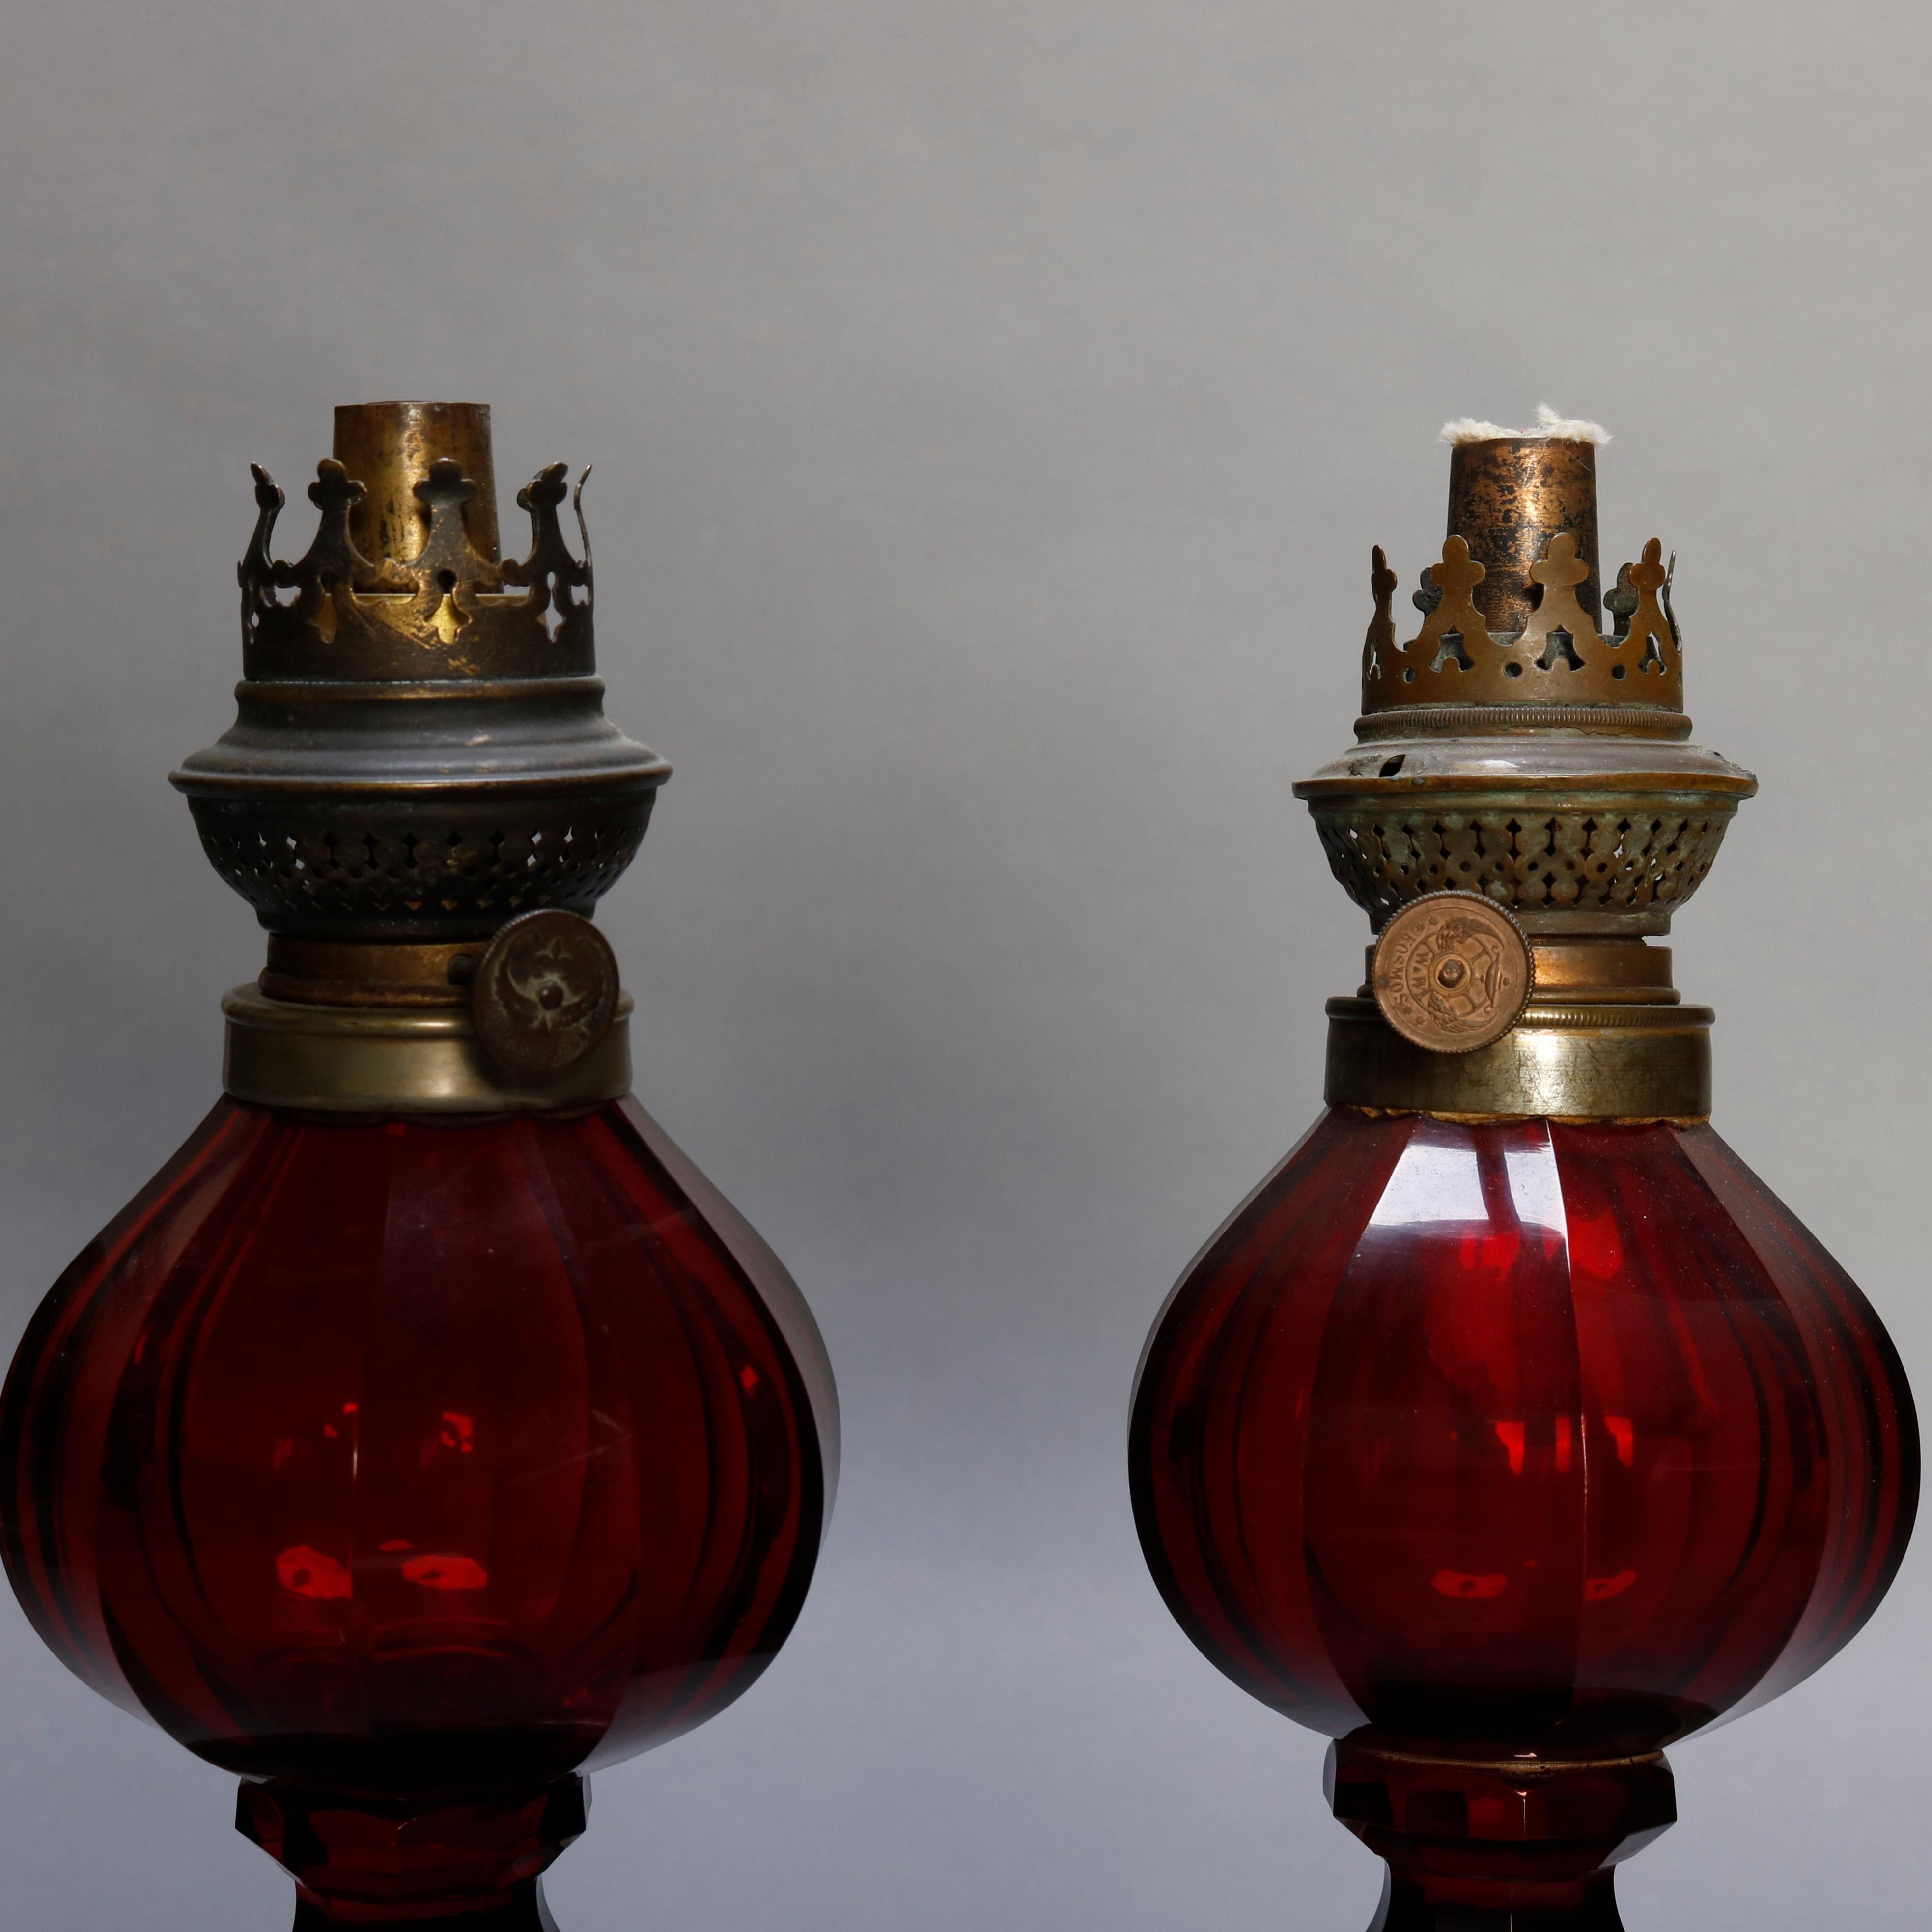 Pair of antique German kerosene lamps by Wild and Wessel offer faceted cranberry glass fonts raised on silver plate bases and having Kosmos burner, circa 1860.

Measures - 13.75” to wick, 5” diameter base, 9.25” chimney.